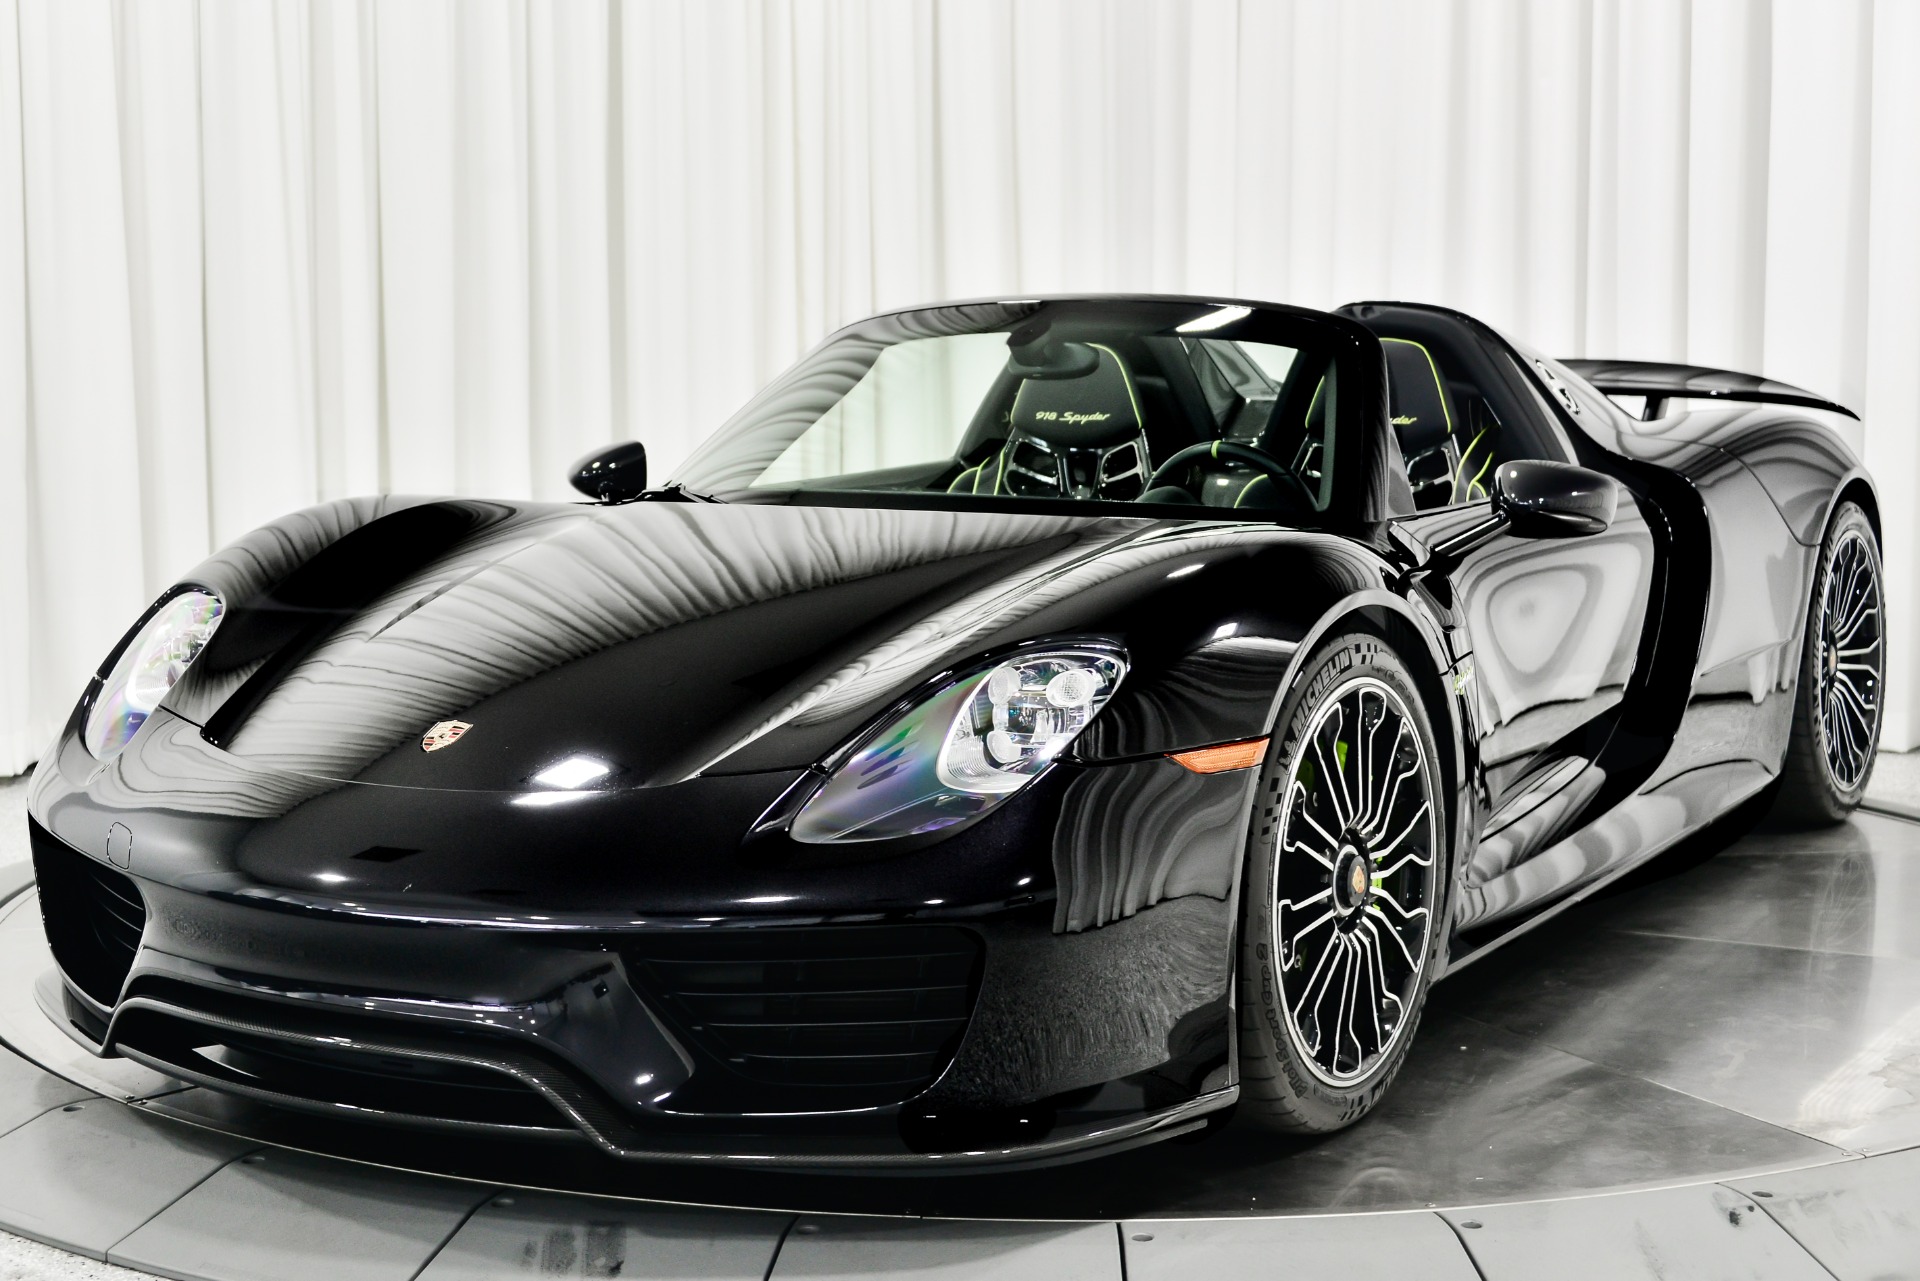 Used 2015 Porsche 918 Spyder For Sale (Sold) Marshall, 41% OFF